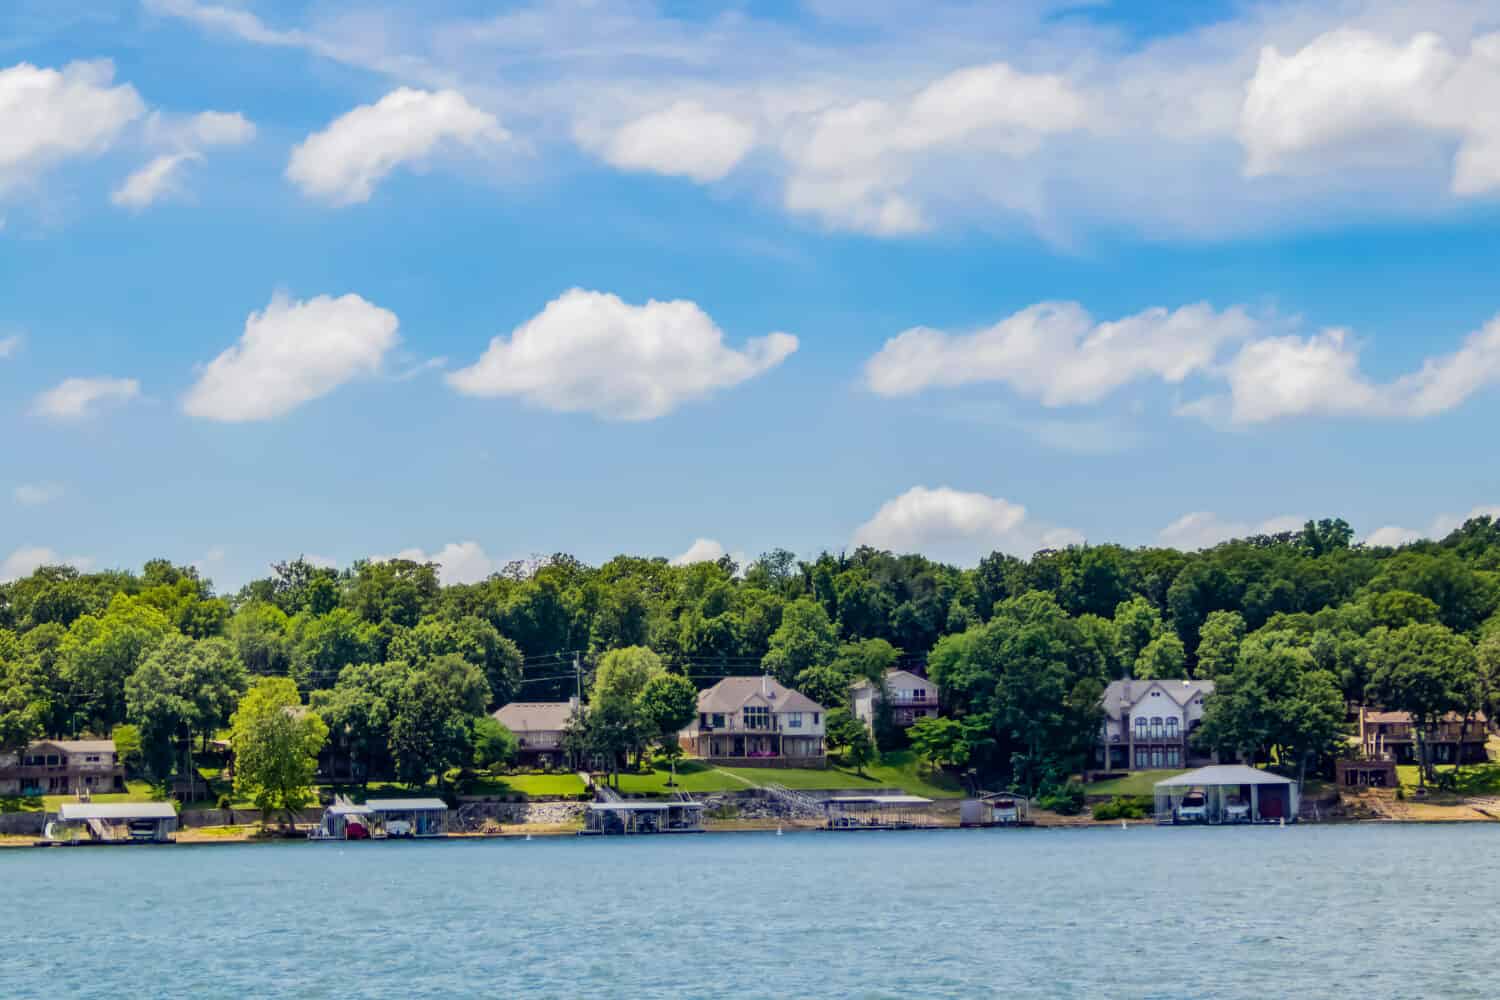 Upscale homes with amazing views on a lake.